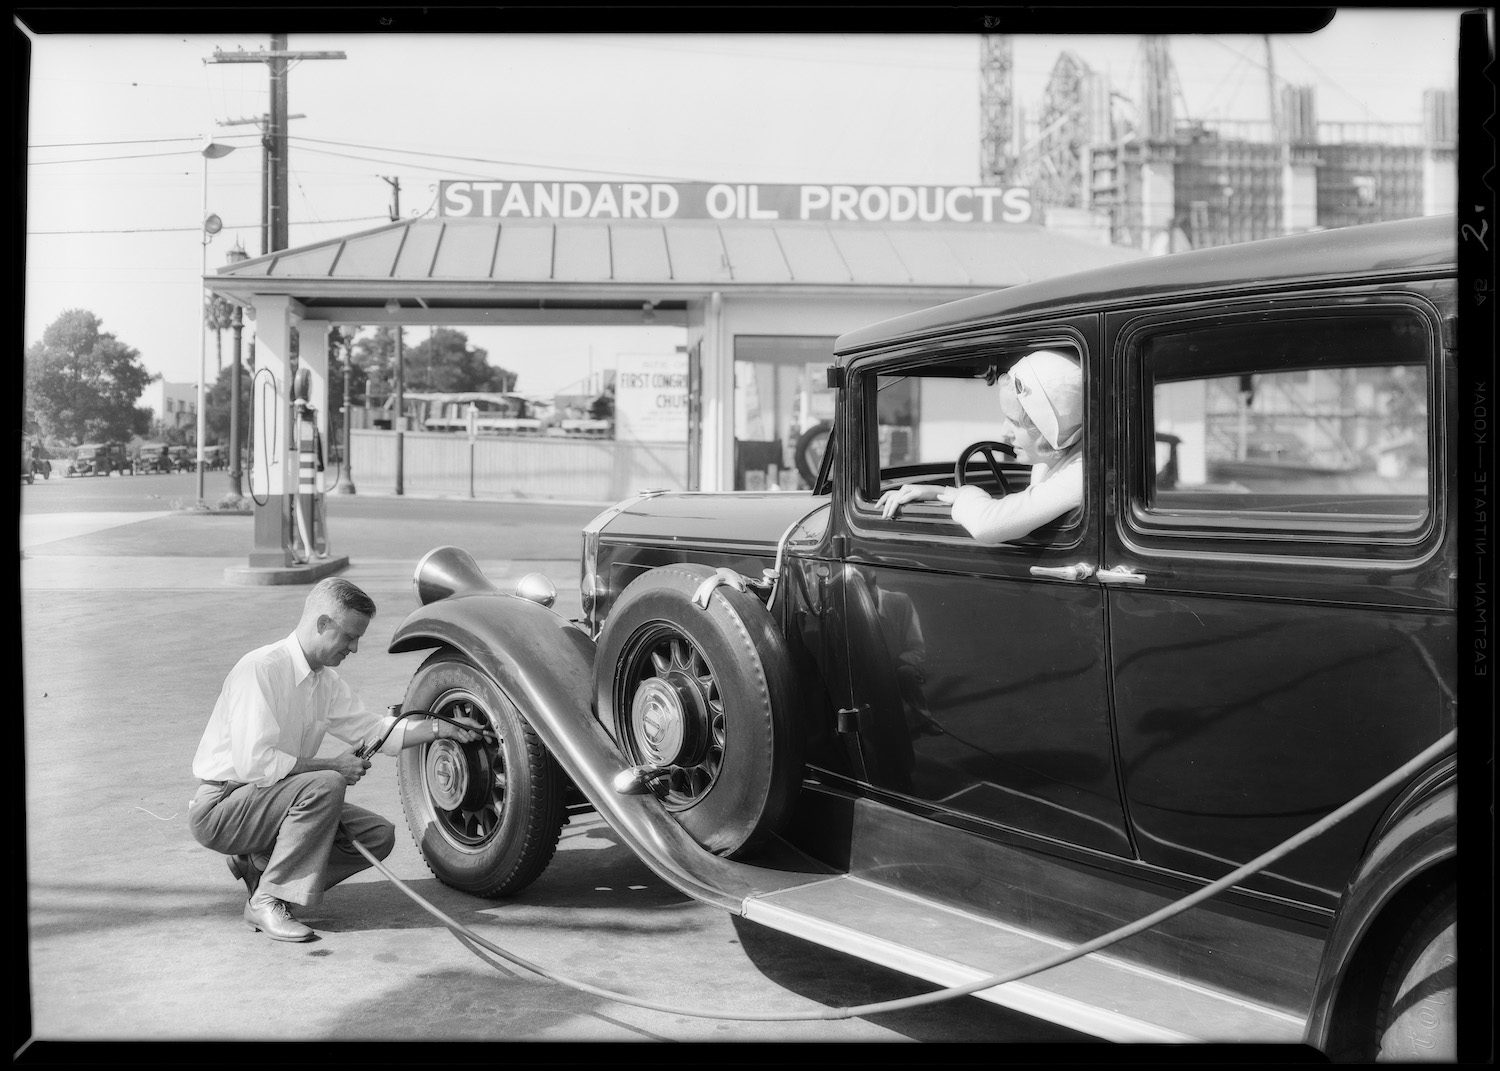 A man crouches by the front tire of a classic car to air up its tires with a hose running from a gas station.